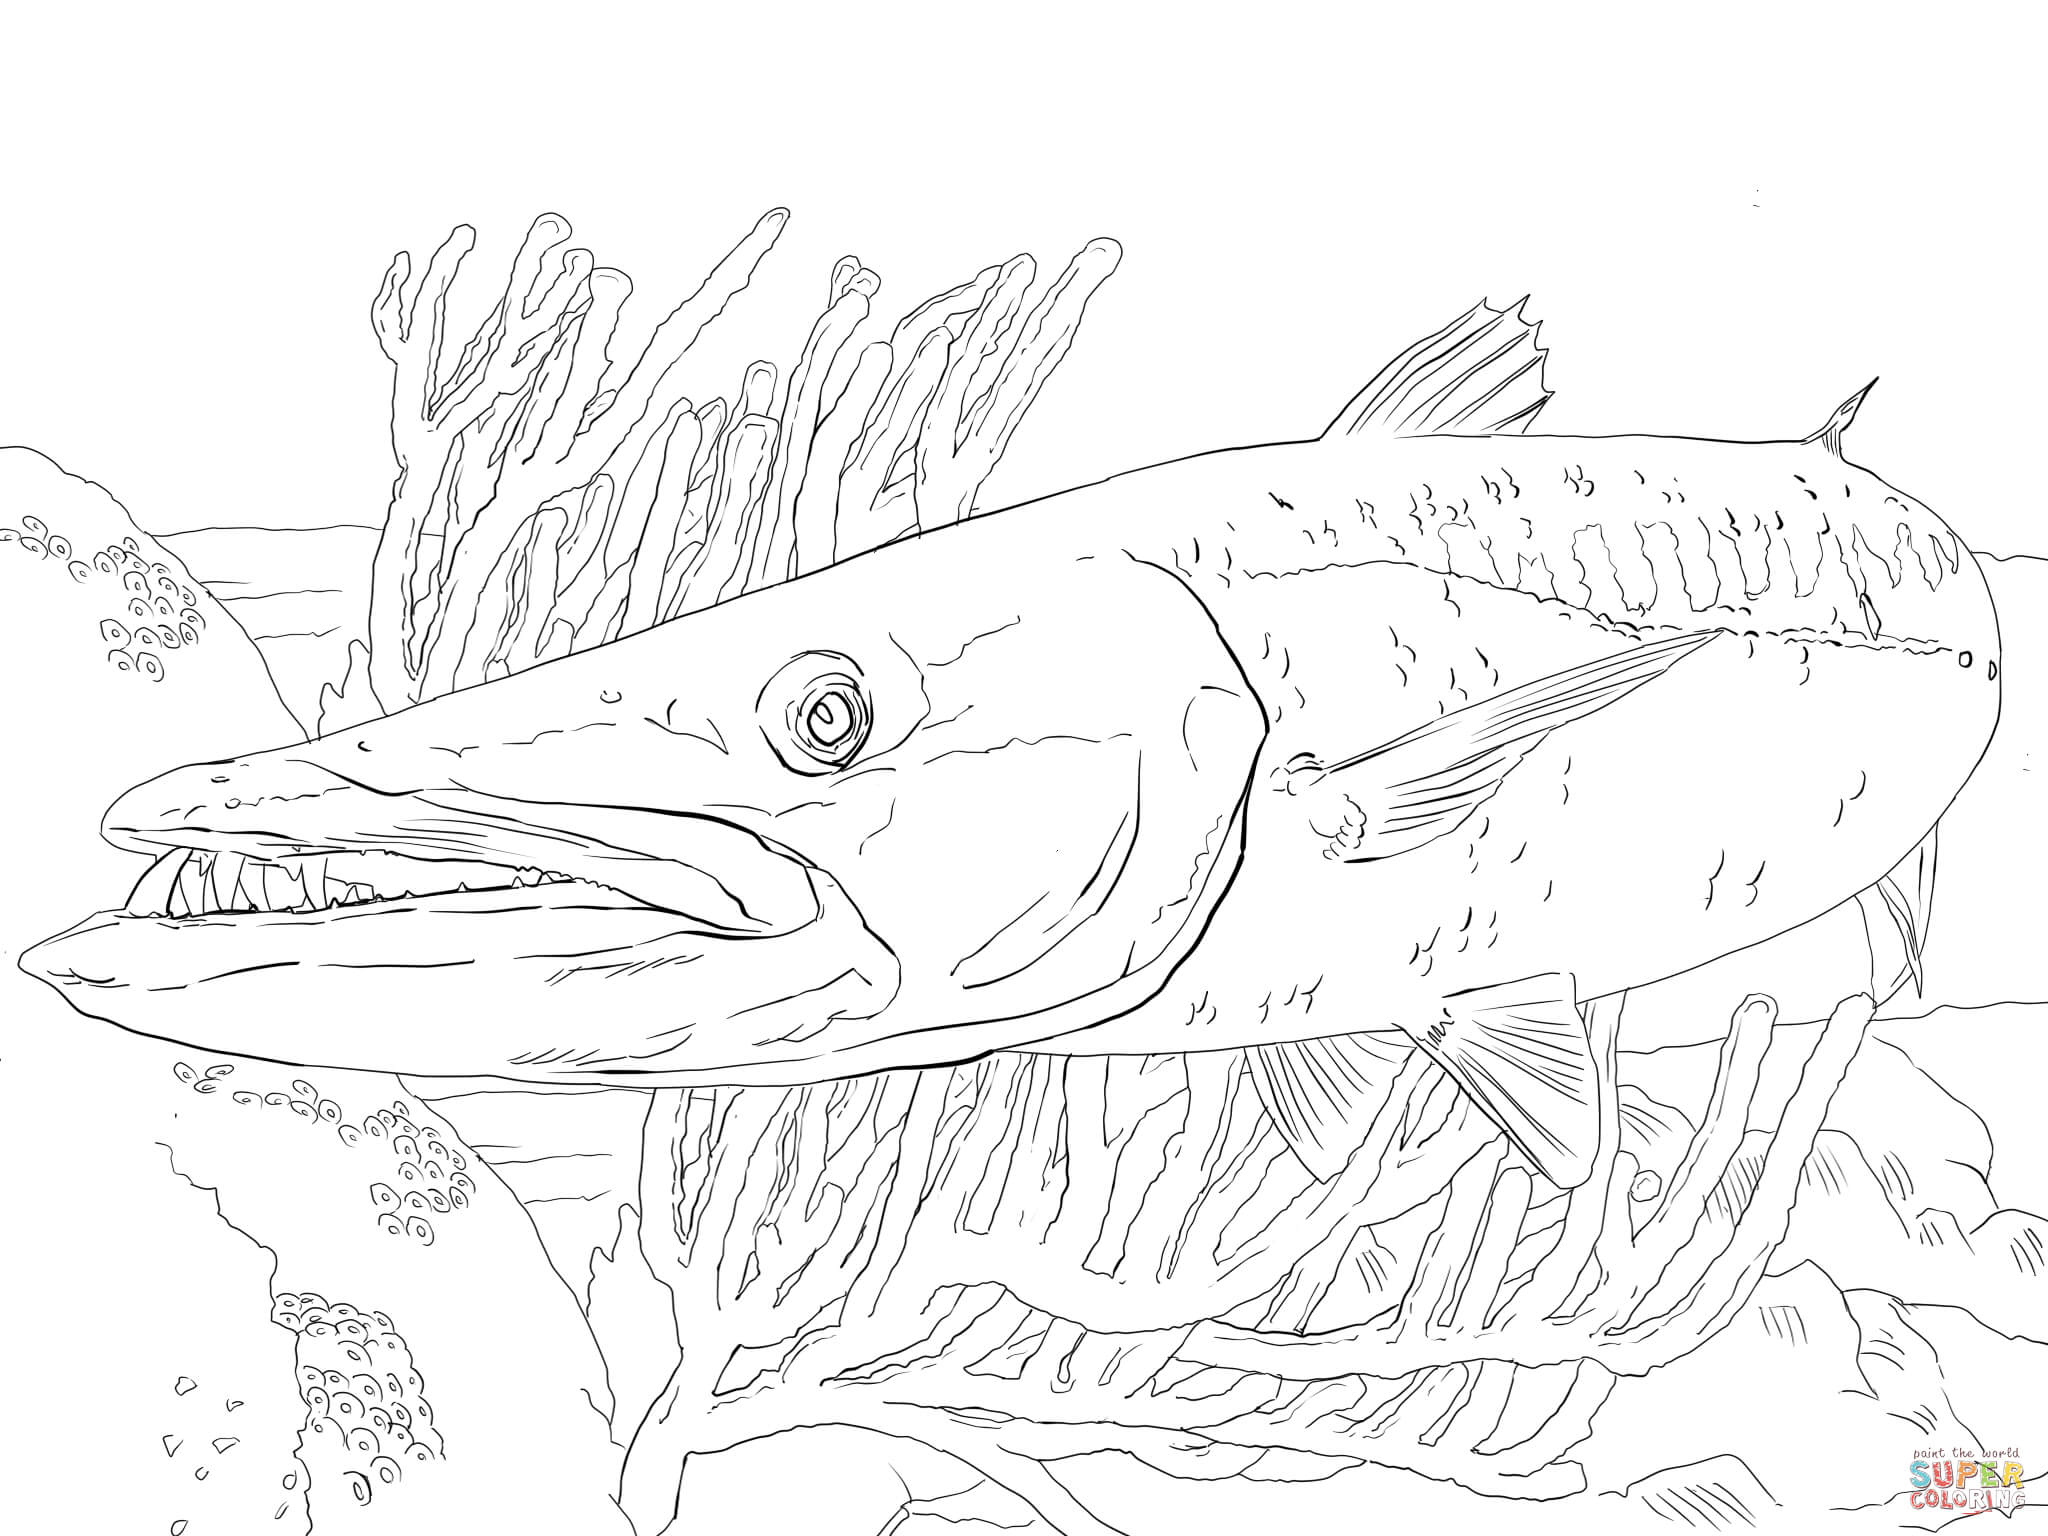 Barracuda fish coloring page free printable coloring pages